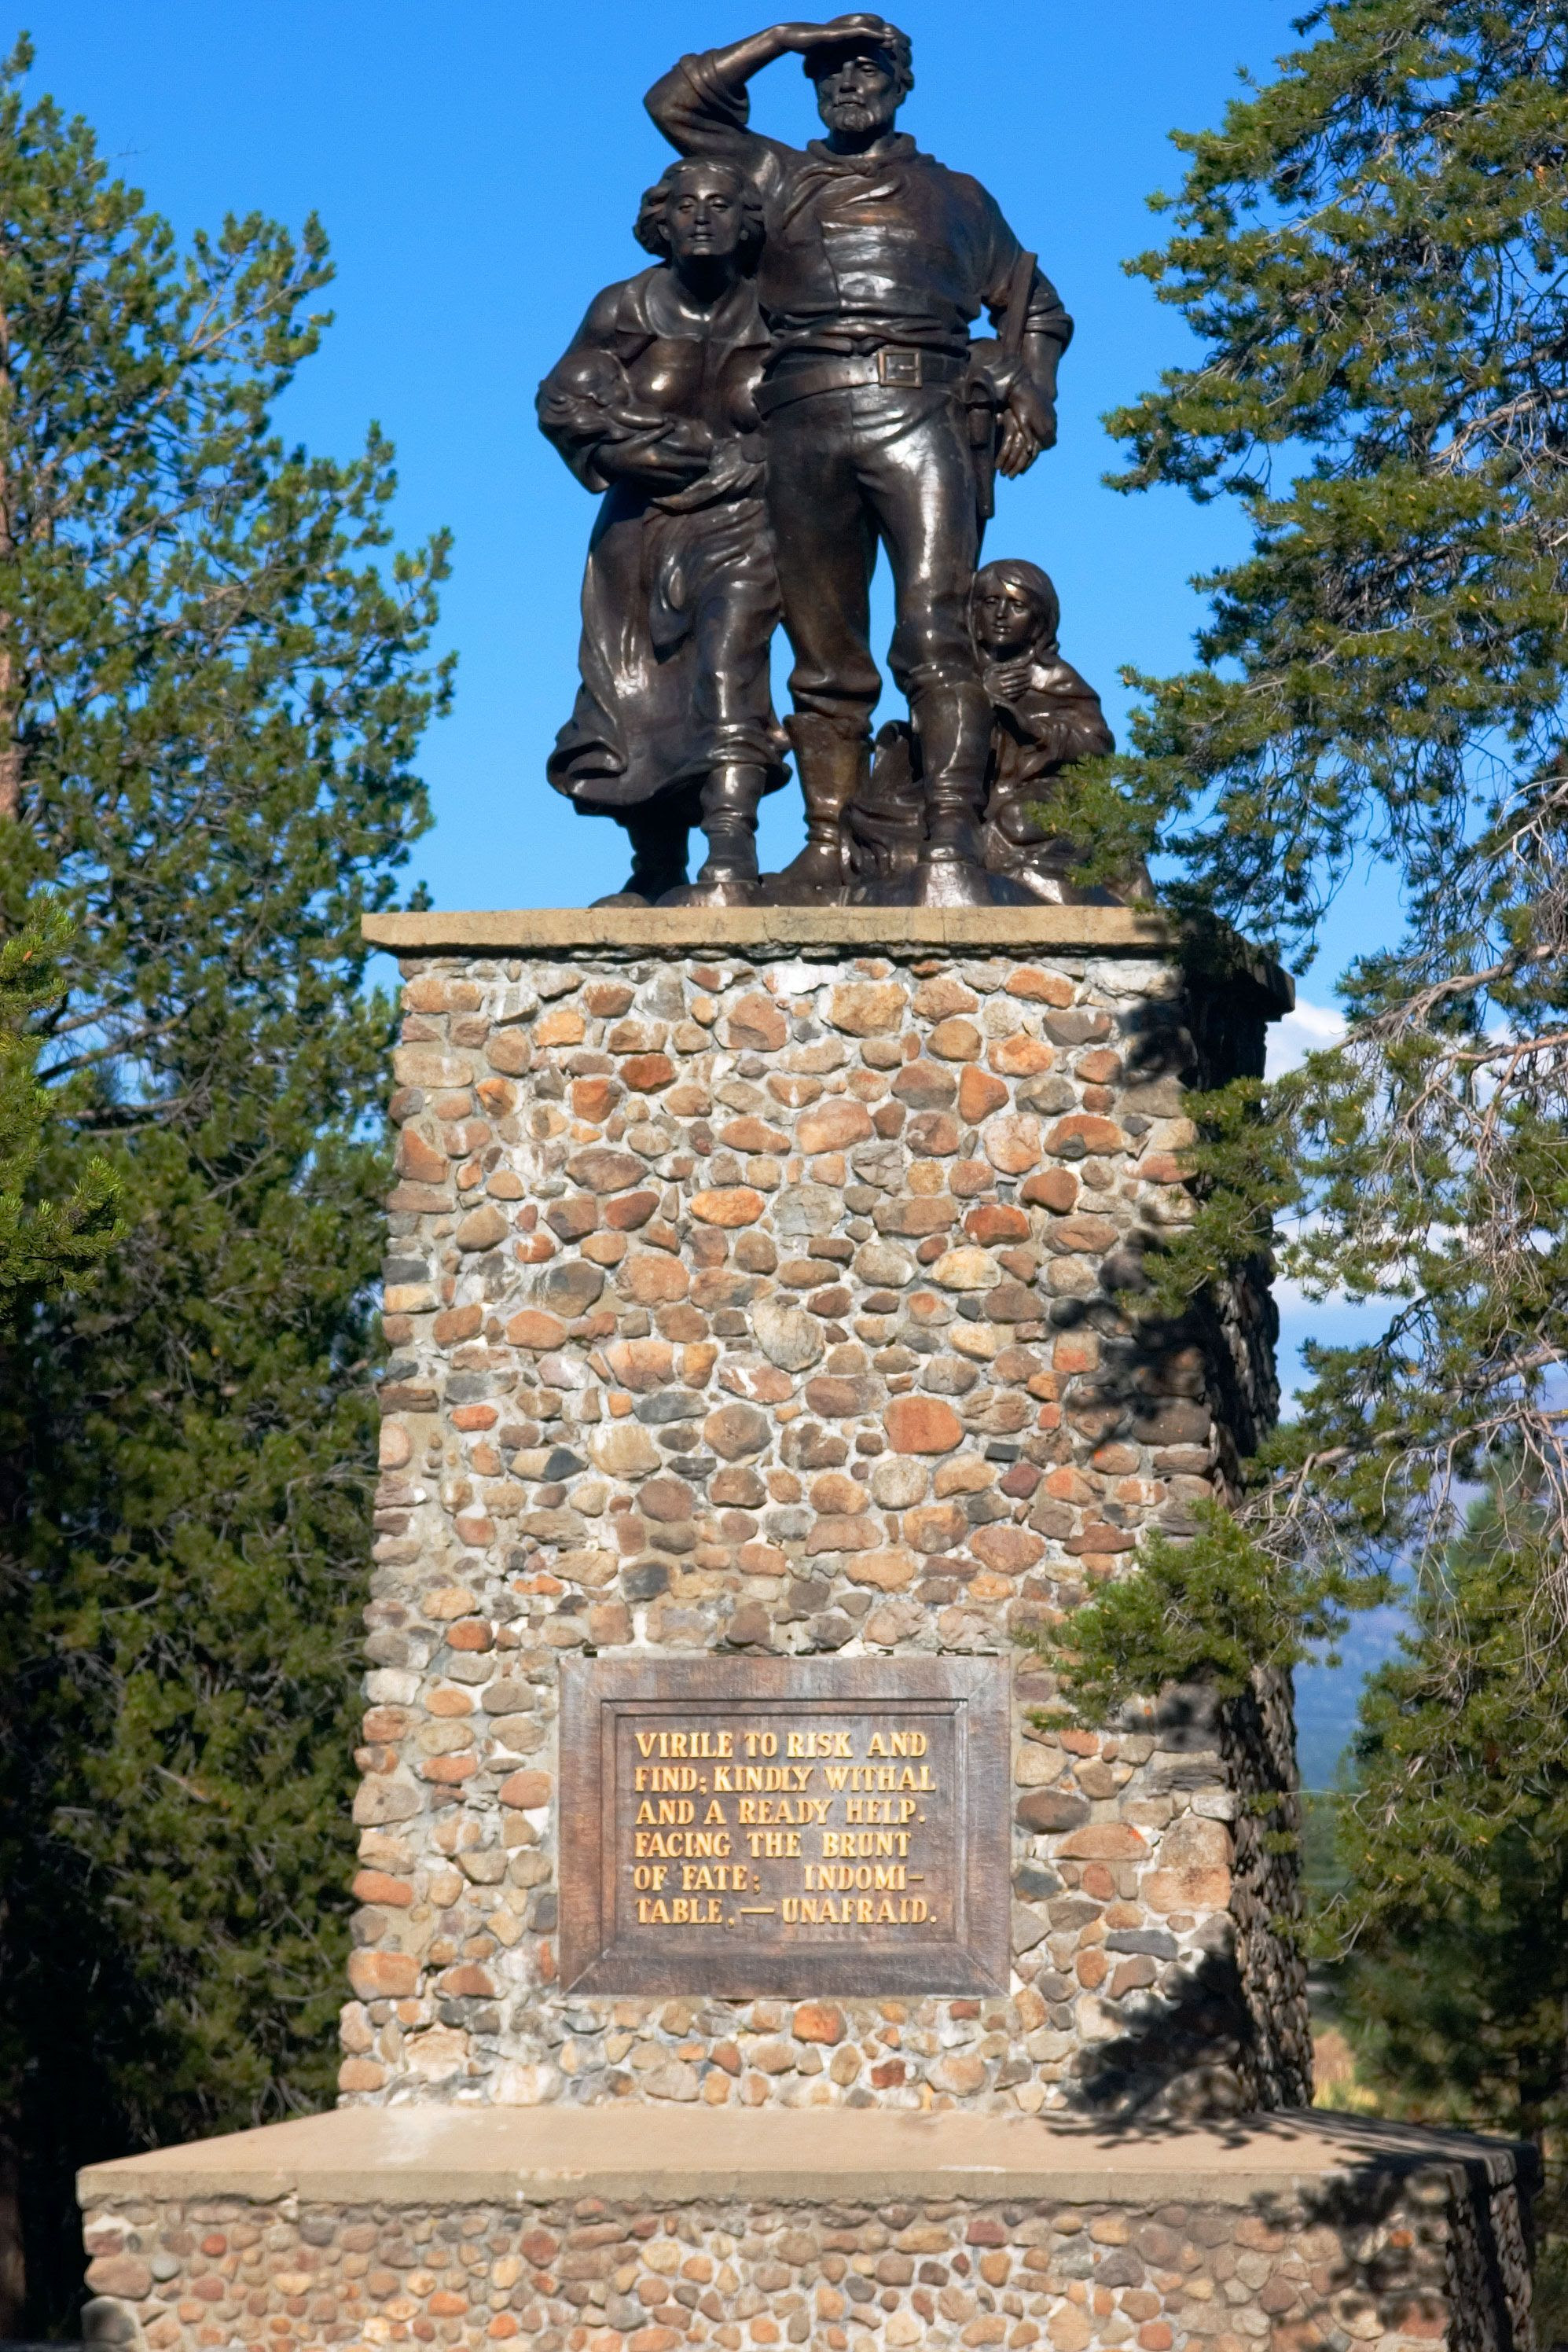 Donner party, State parks, National register of historic places